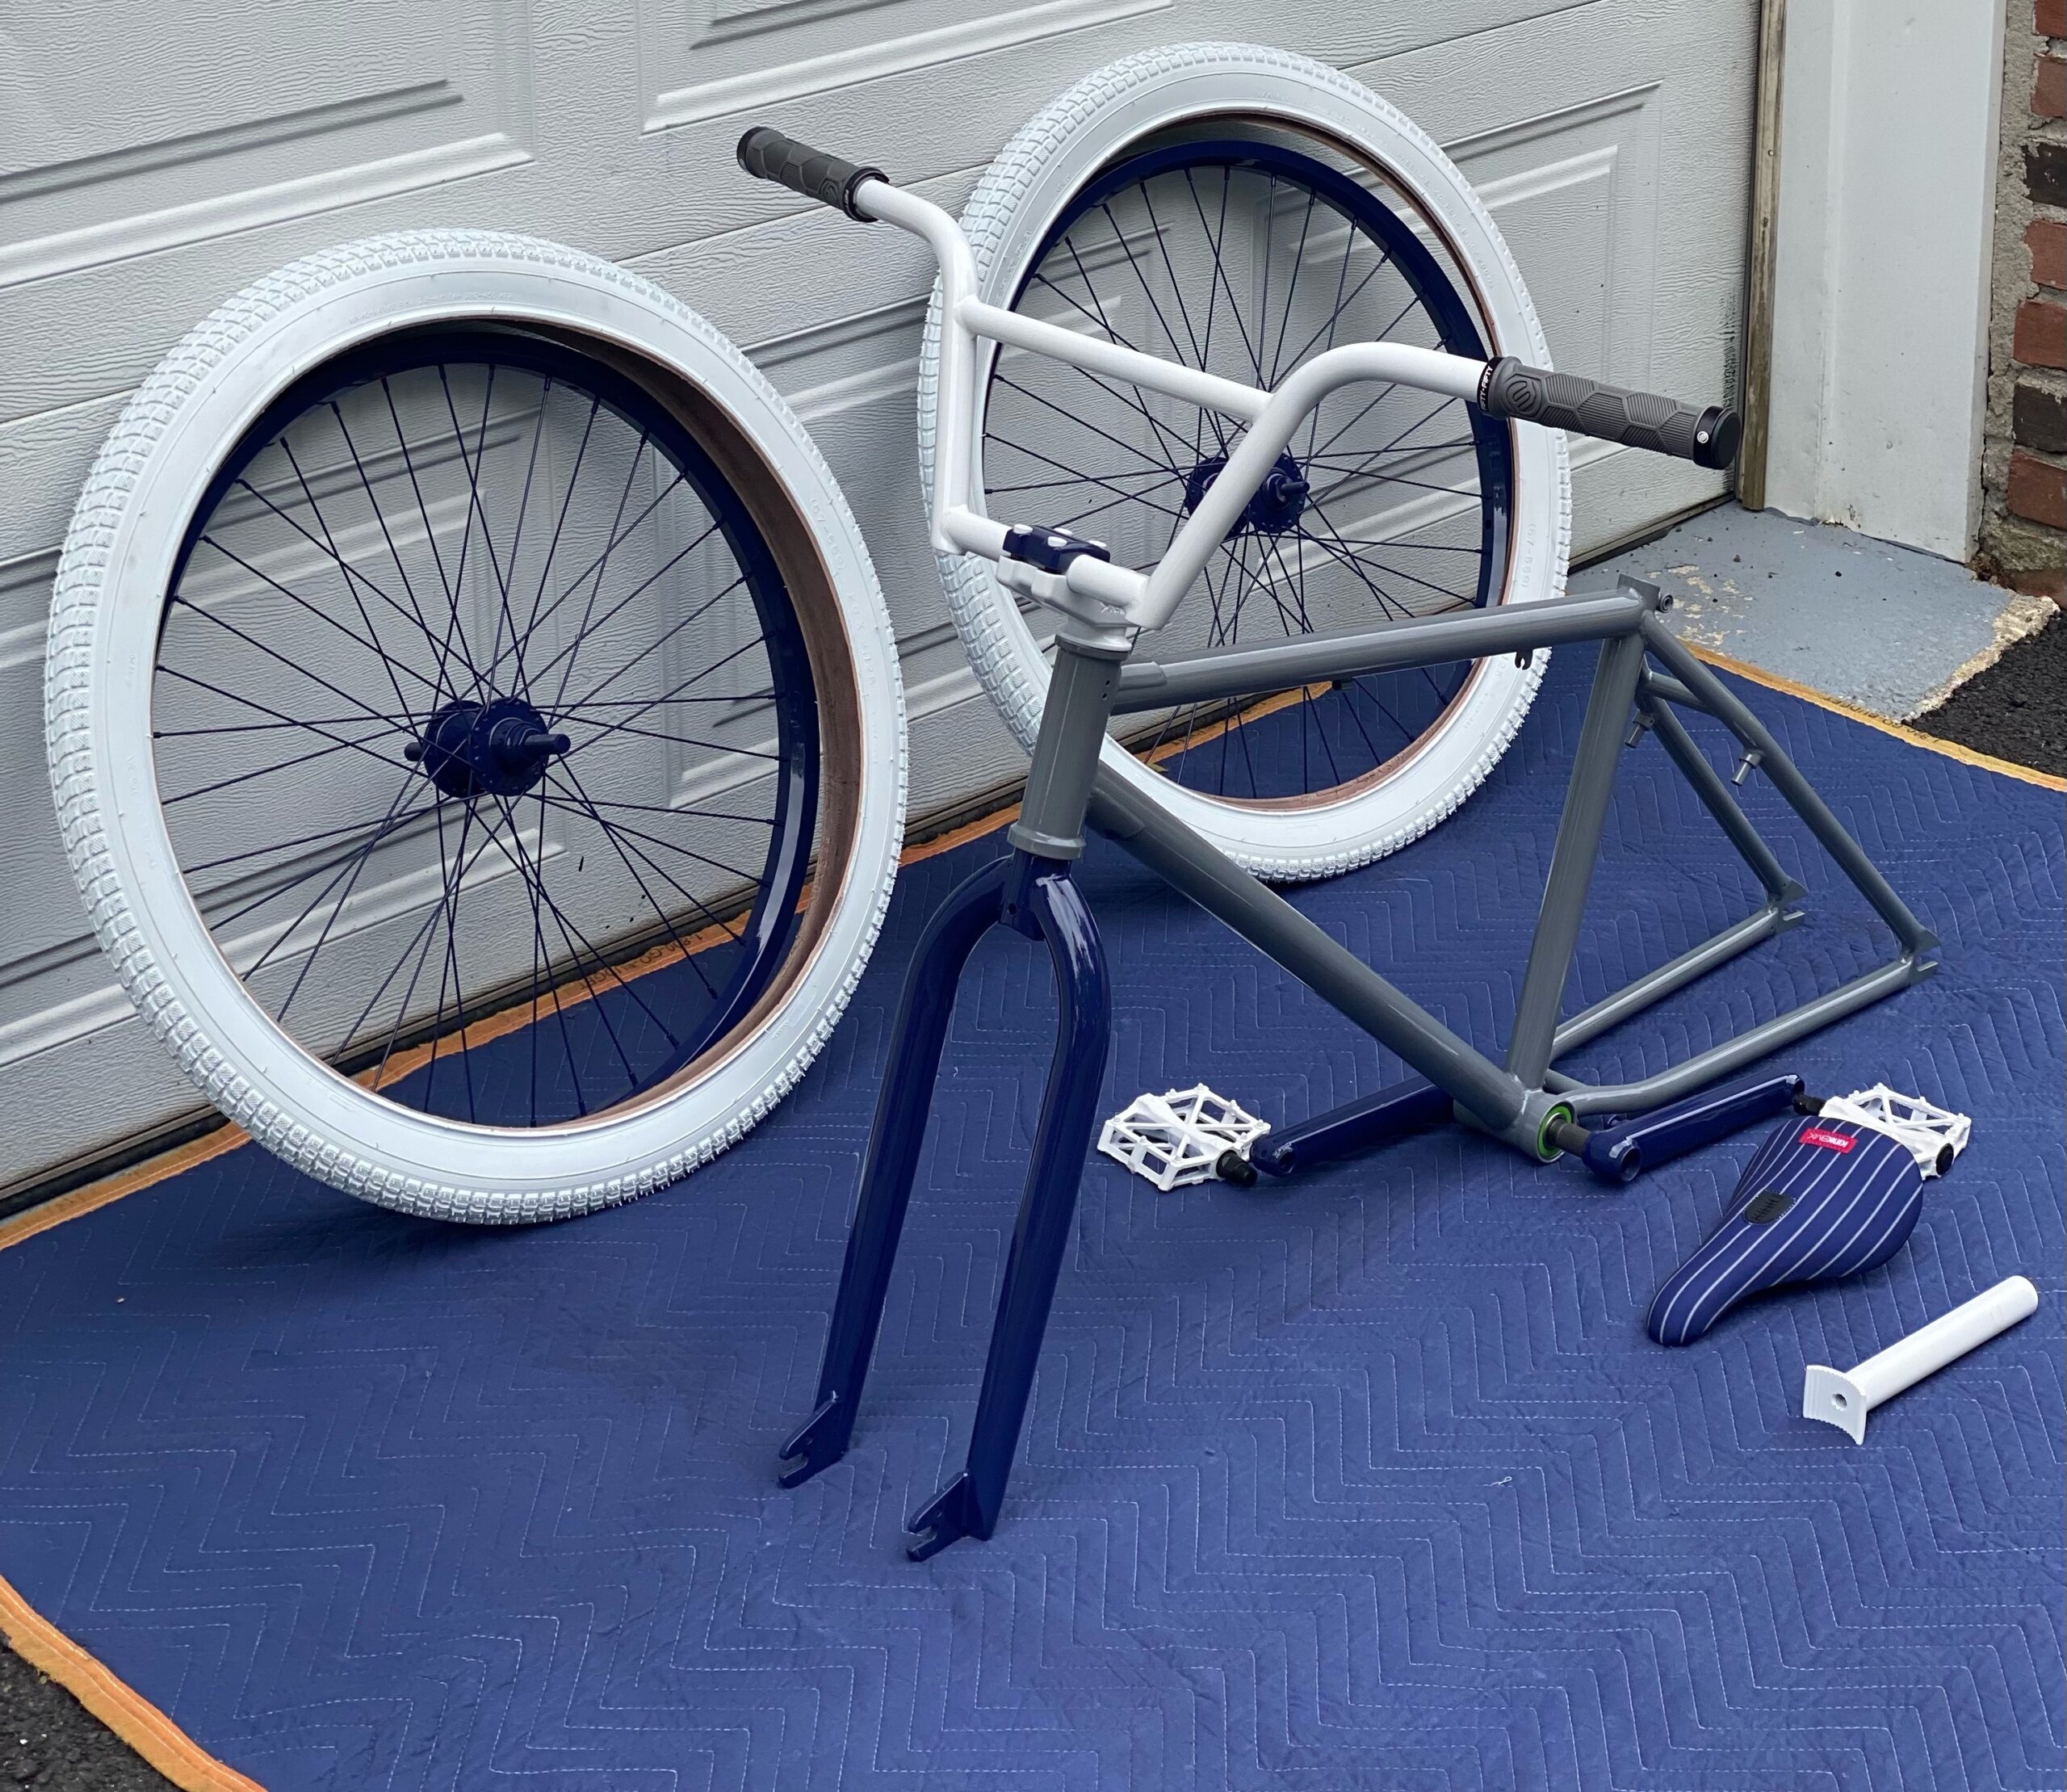 Travis Foreman is currently working on putting together a Yankees-inspired bike for a customer in Greenwich, Connecticut.